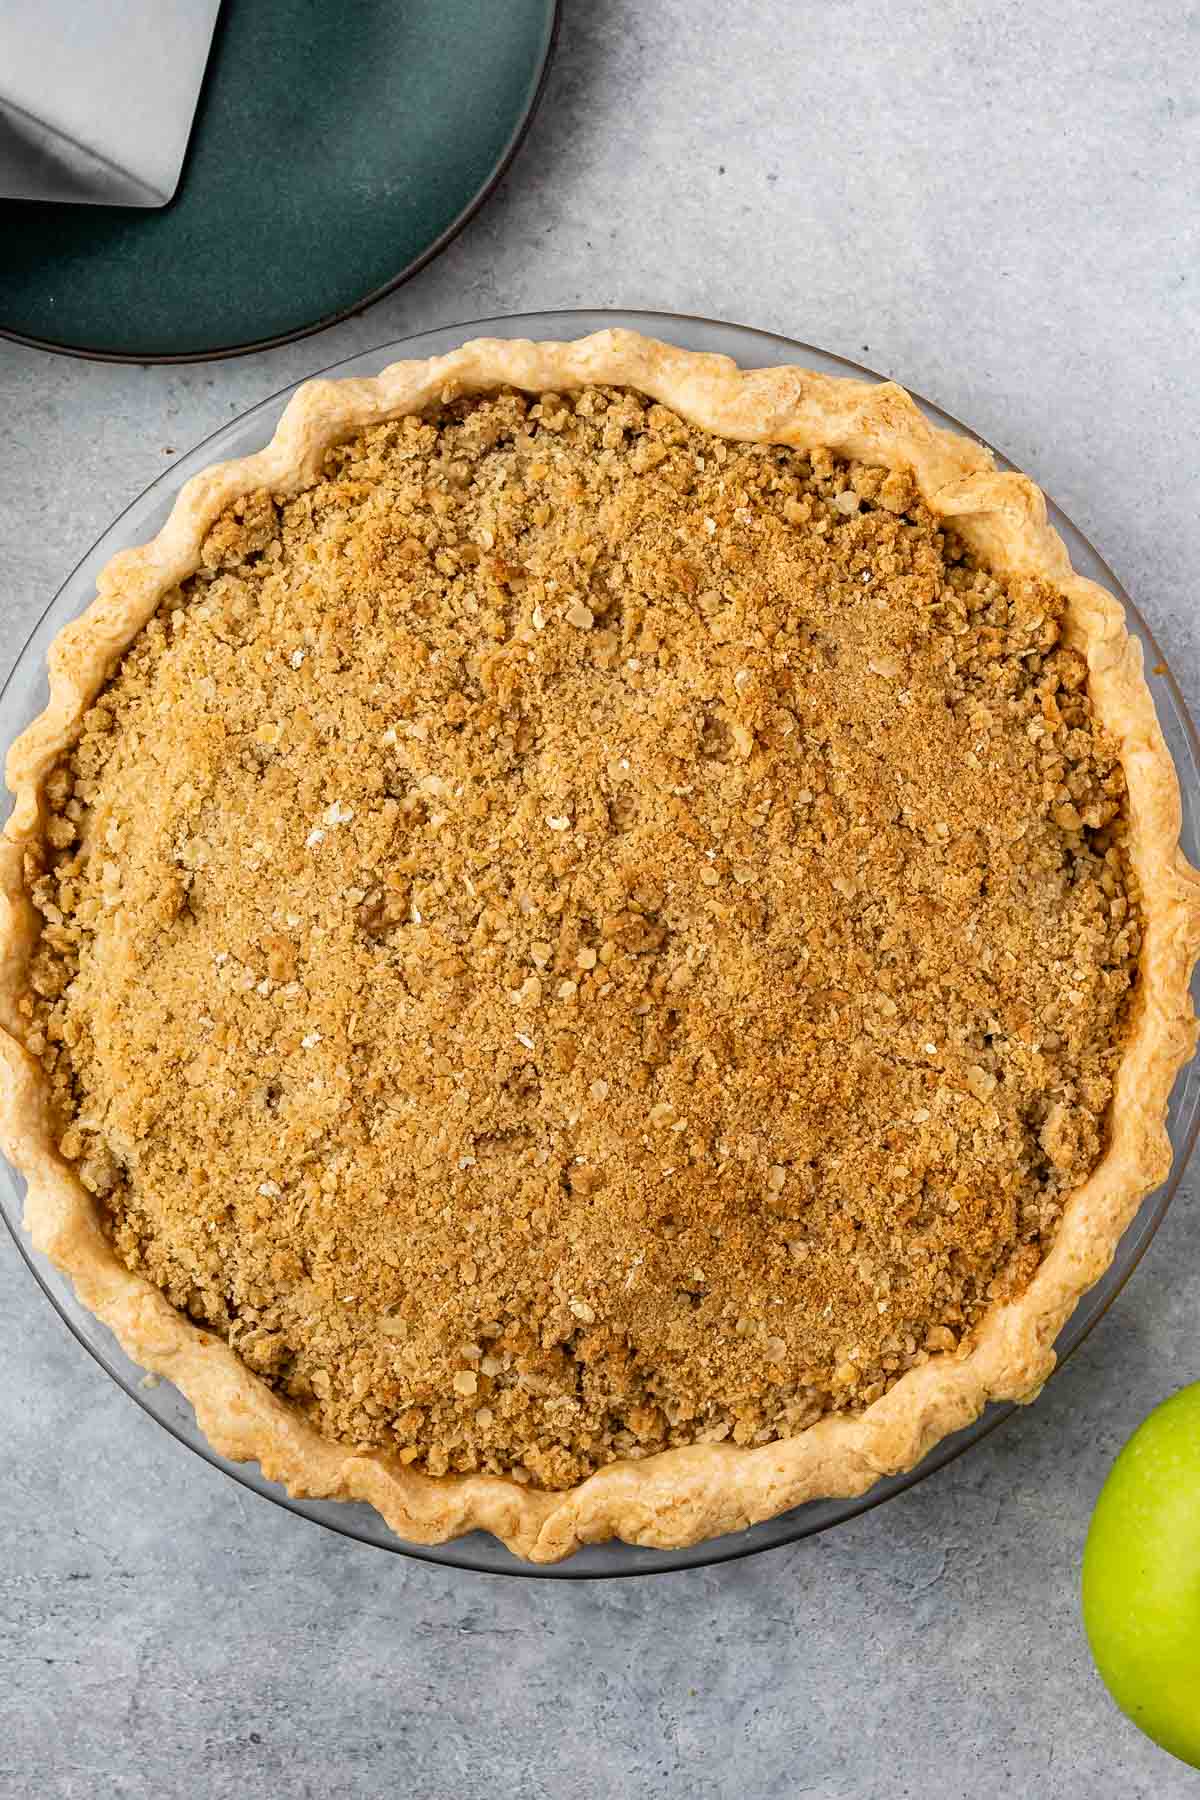 full circular pie with crumble topping